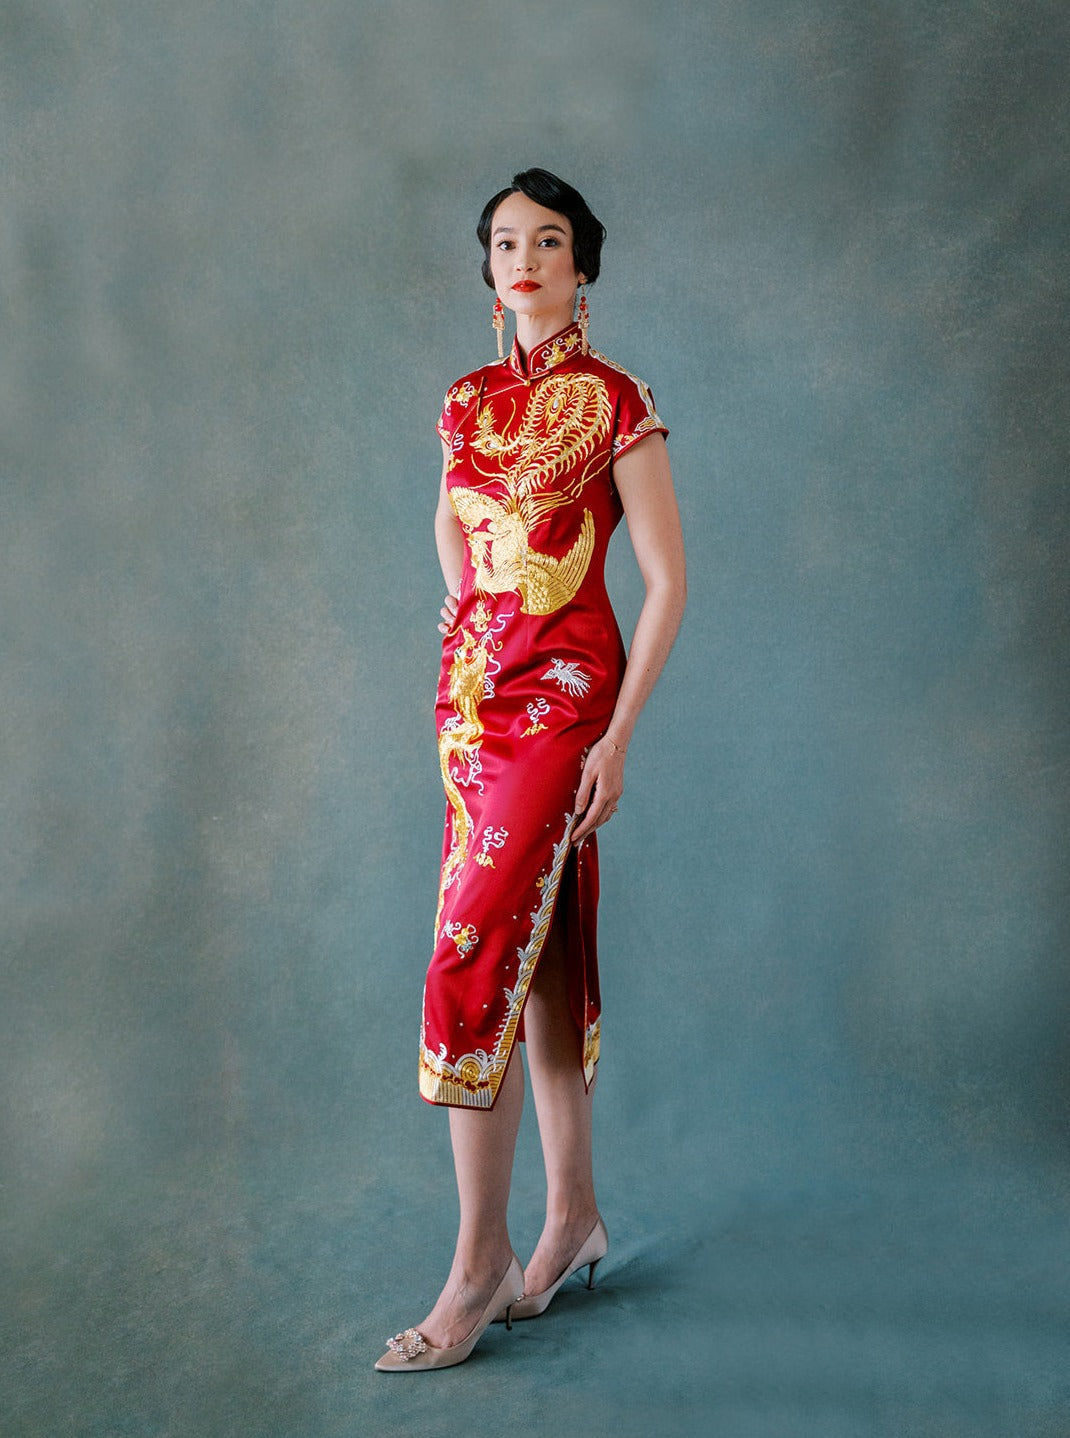 The Roots of the Qipao